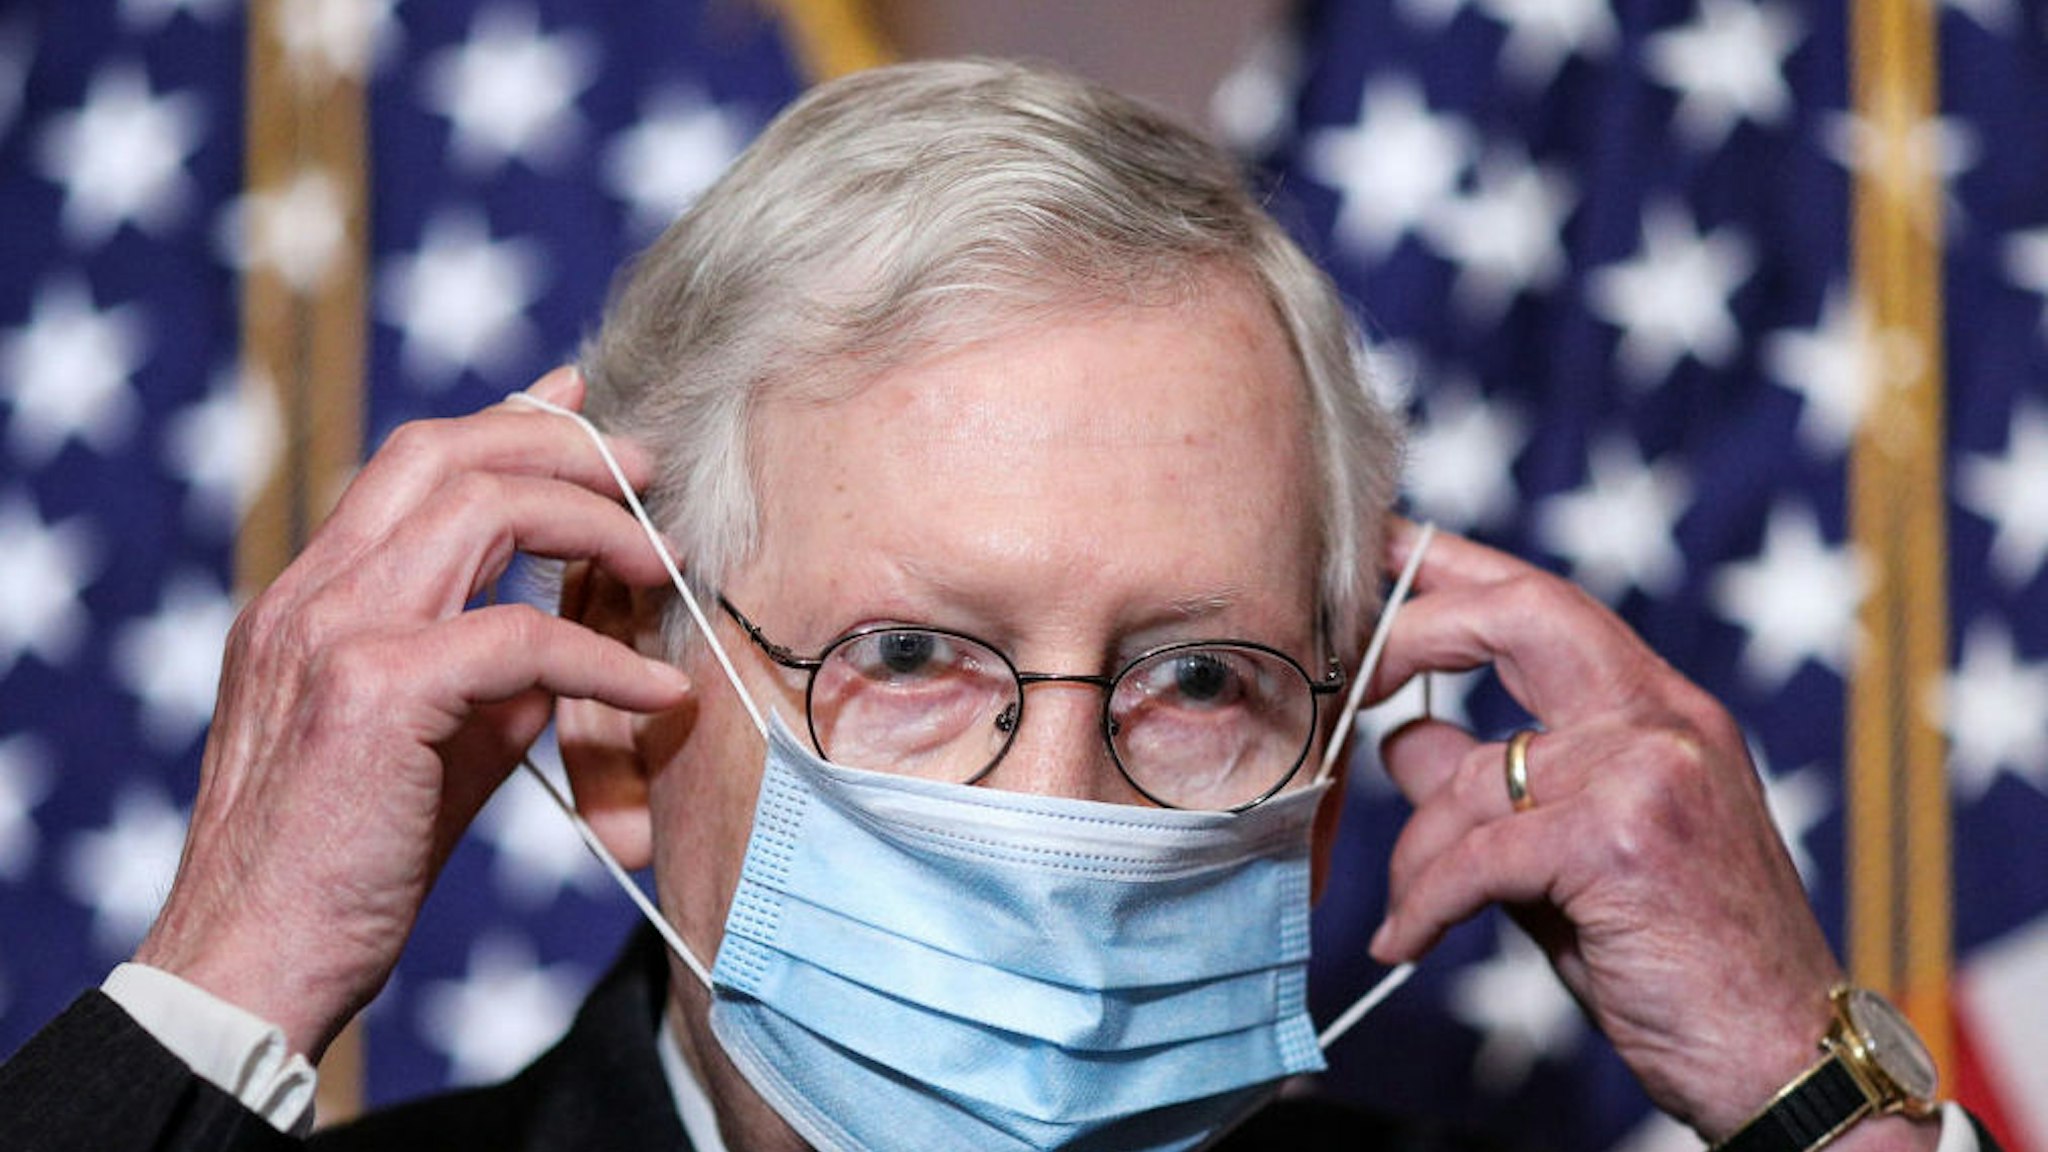 WASHINGTON, DC - DECEMBER 15: UU.S. Senate Majority Leader Mitch McConnell (R-KY) removes his face mask as he arrives for a news conference with other Senate Republicans at the U.S. Capitol on December 15, 2020 in Washington, DC.